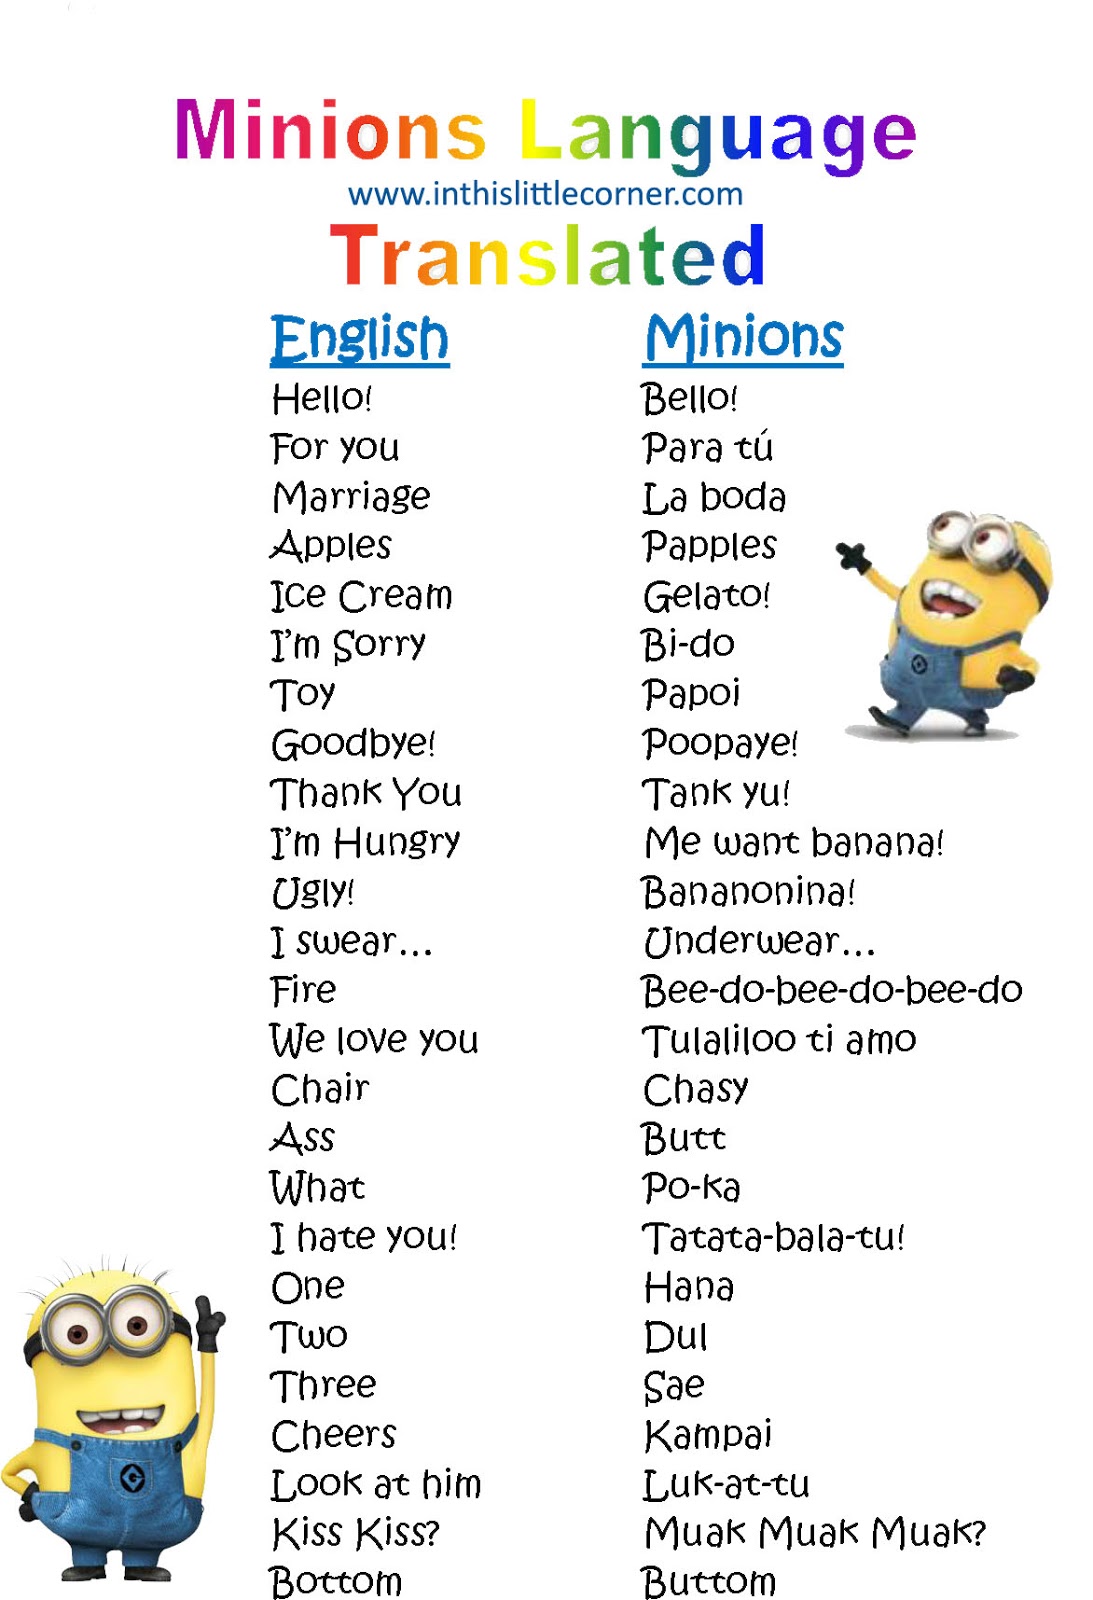 list of all the minions names